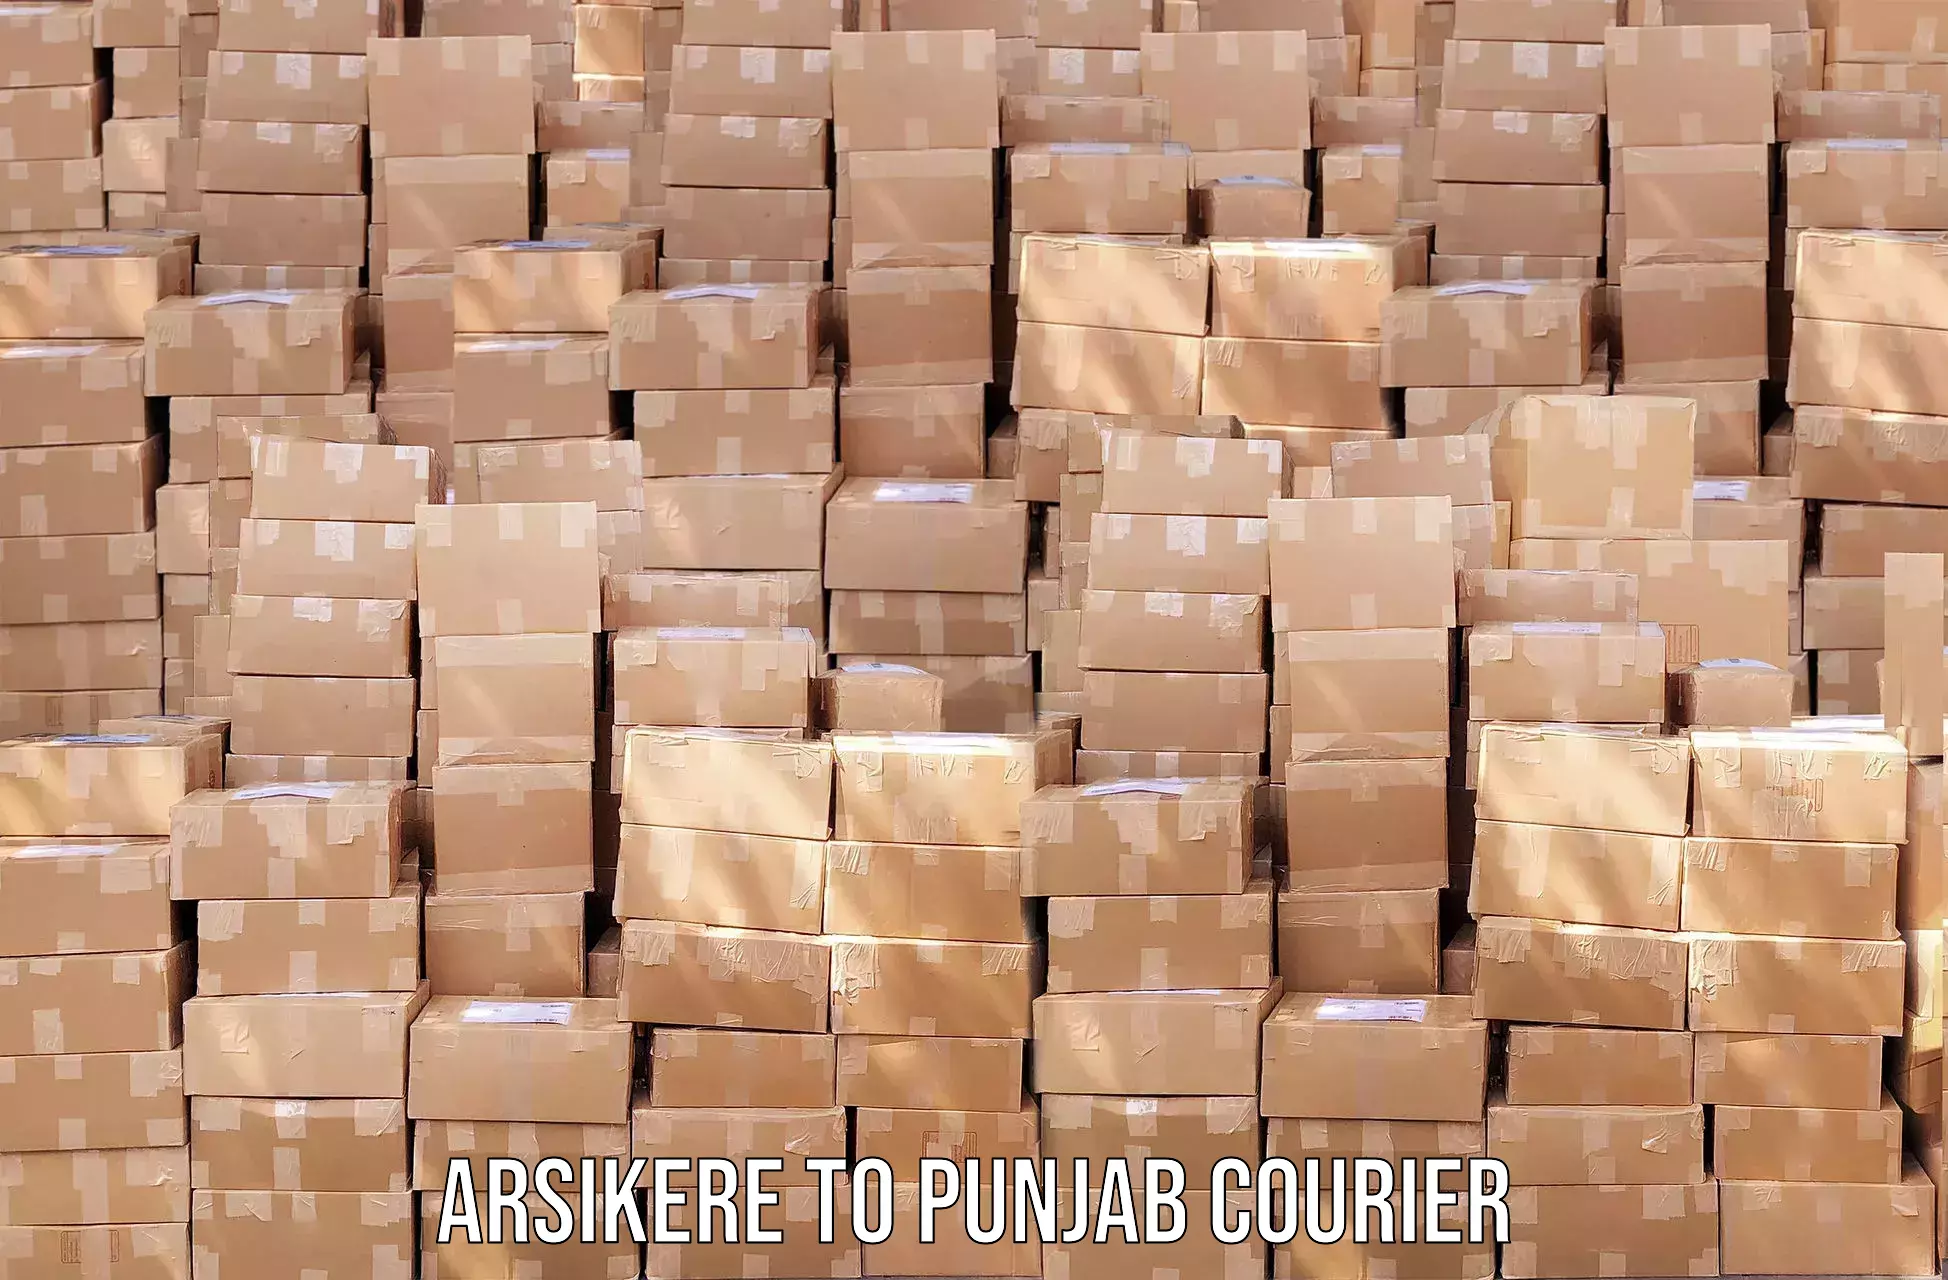 Personalized courier experiences Arsikere to Punjab